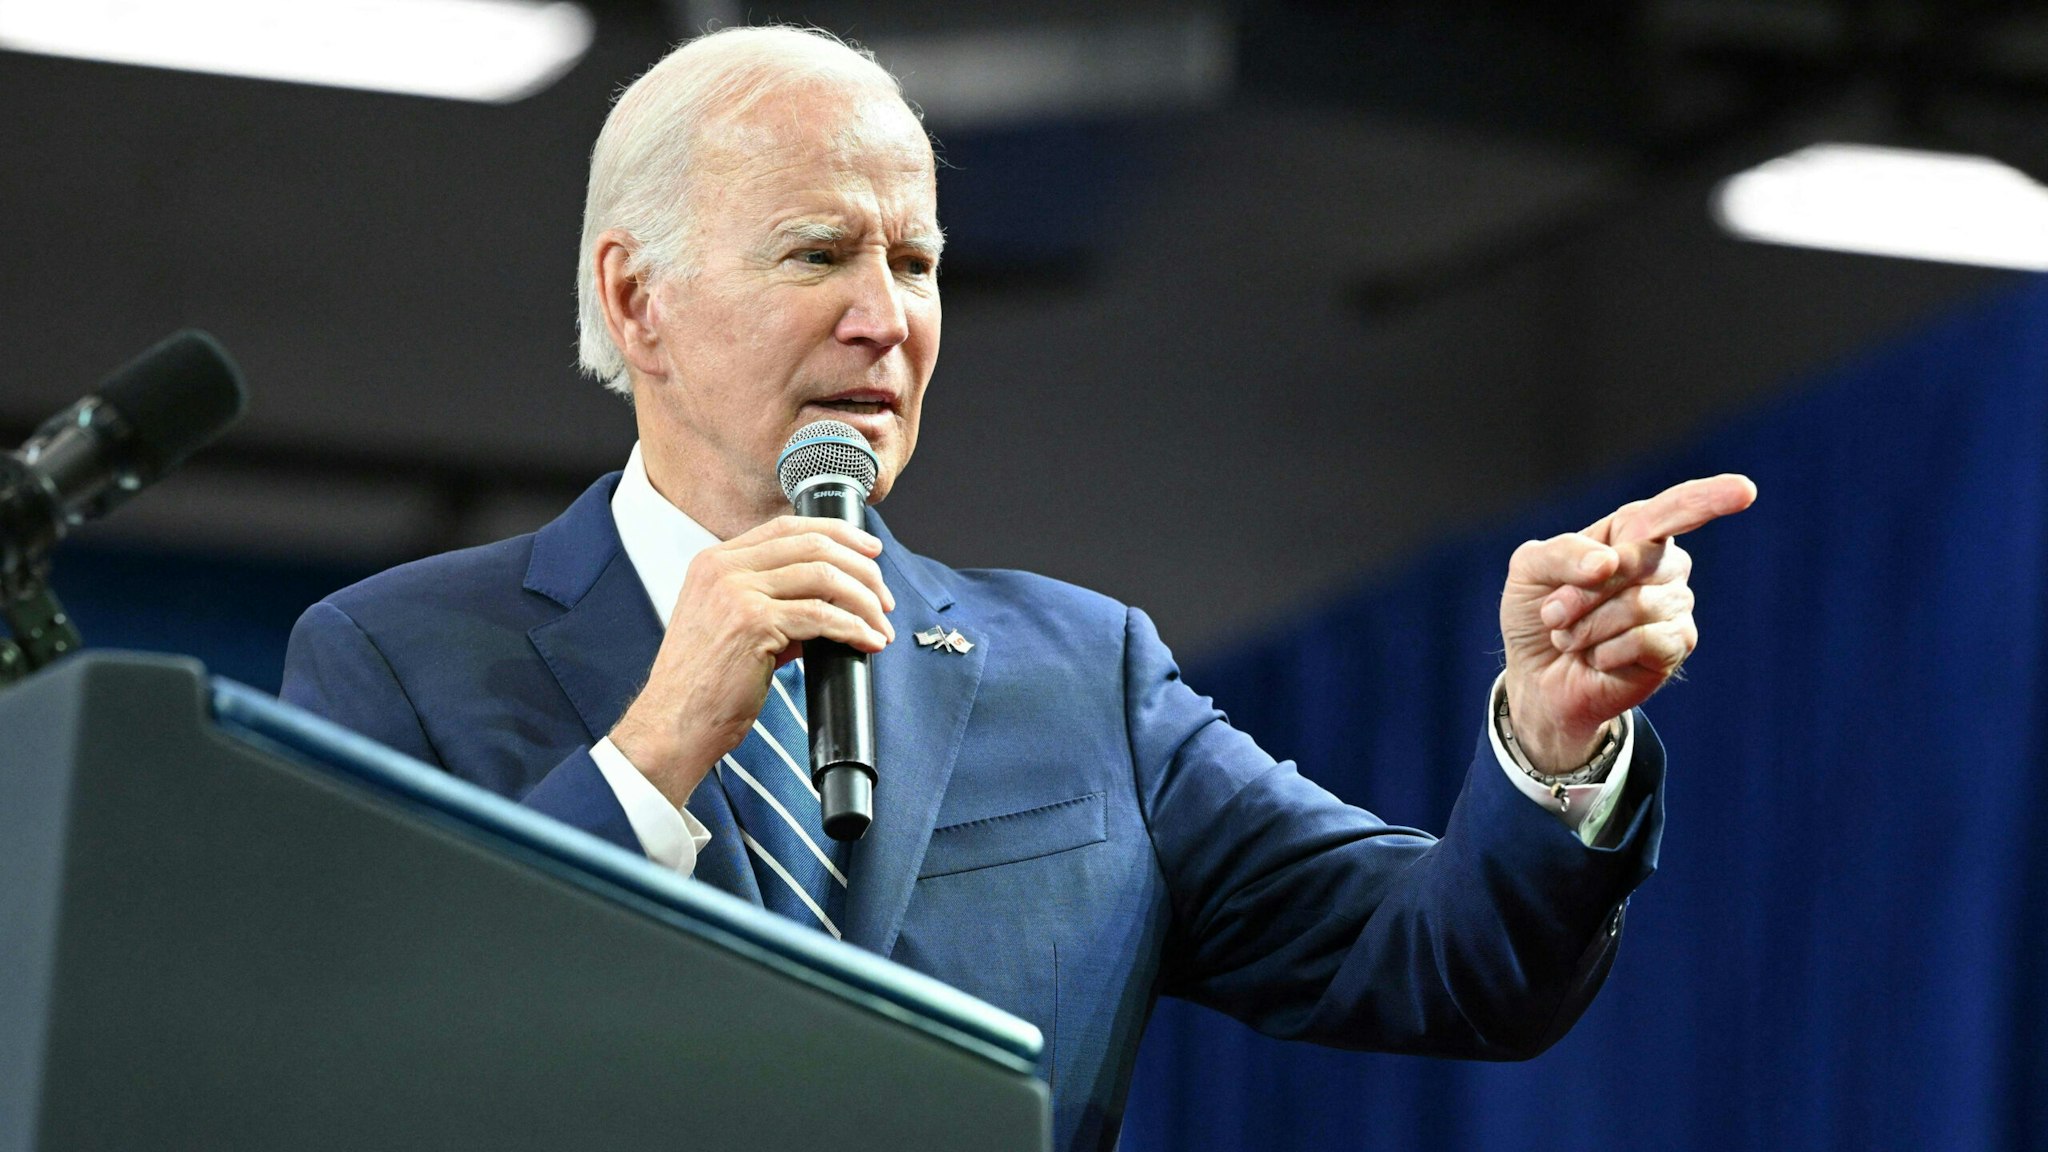 US President Joe Biden speaks on manufacturing at the SRC Arena and Events Center of Onondaga Community College in Syracuse, New York on October 27, 2022.